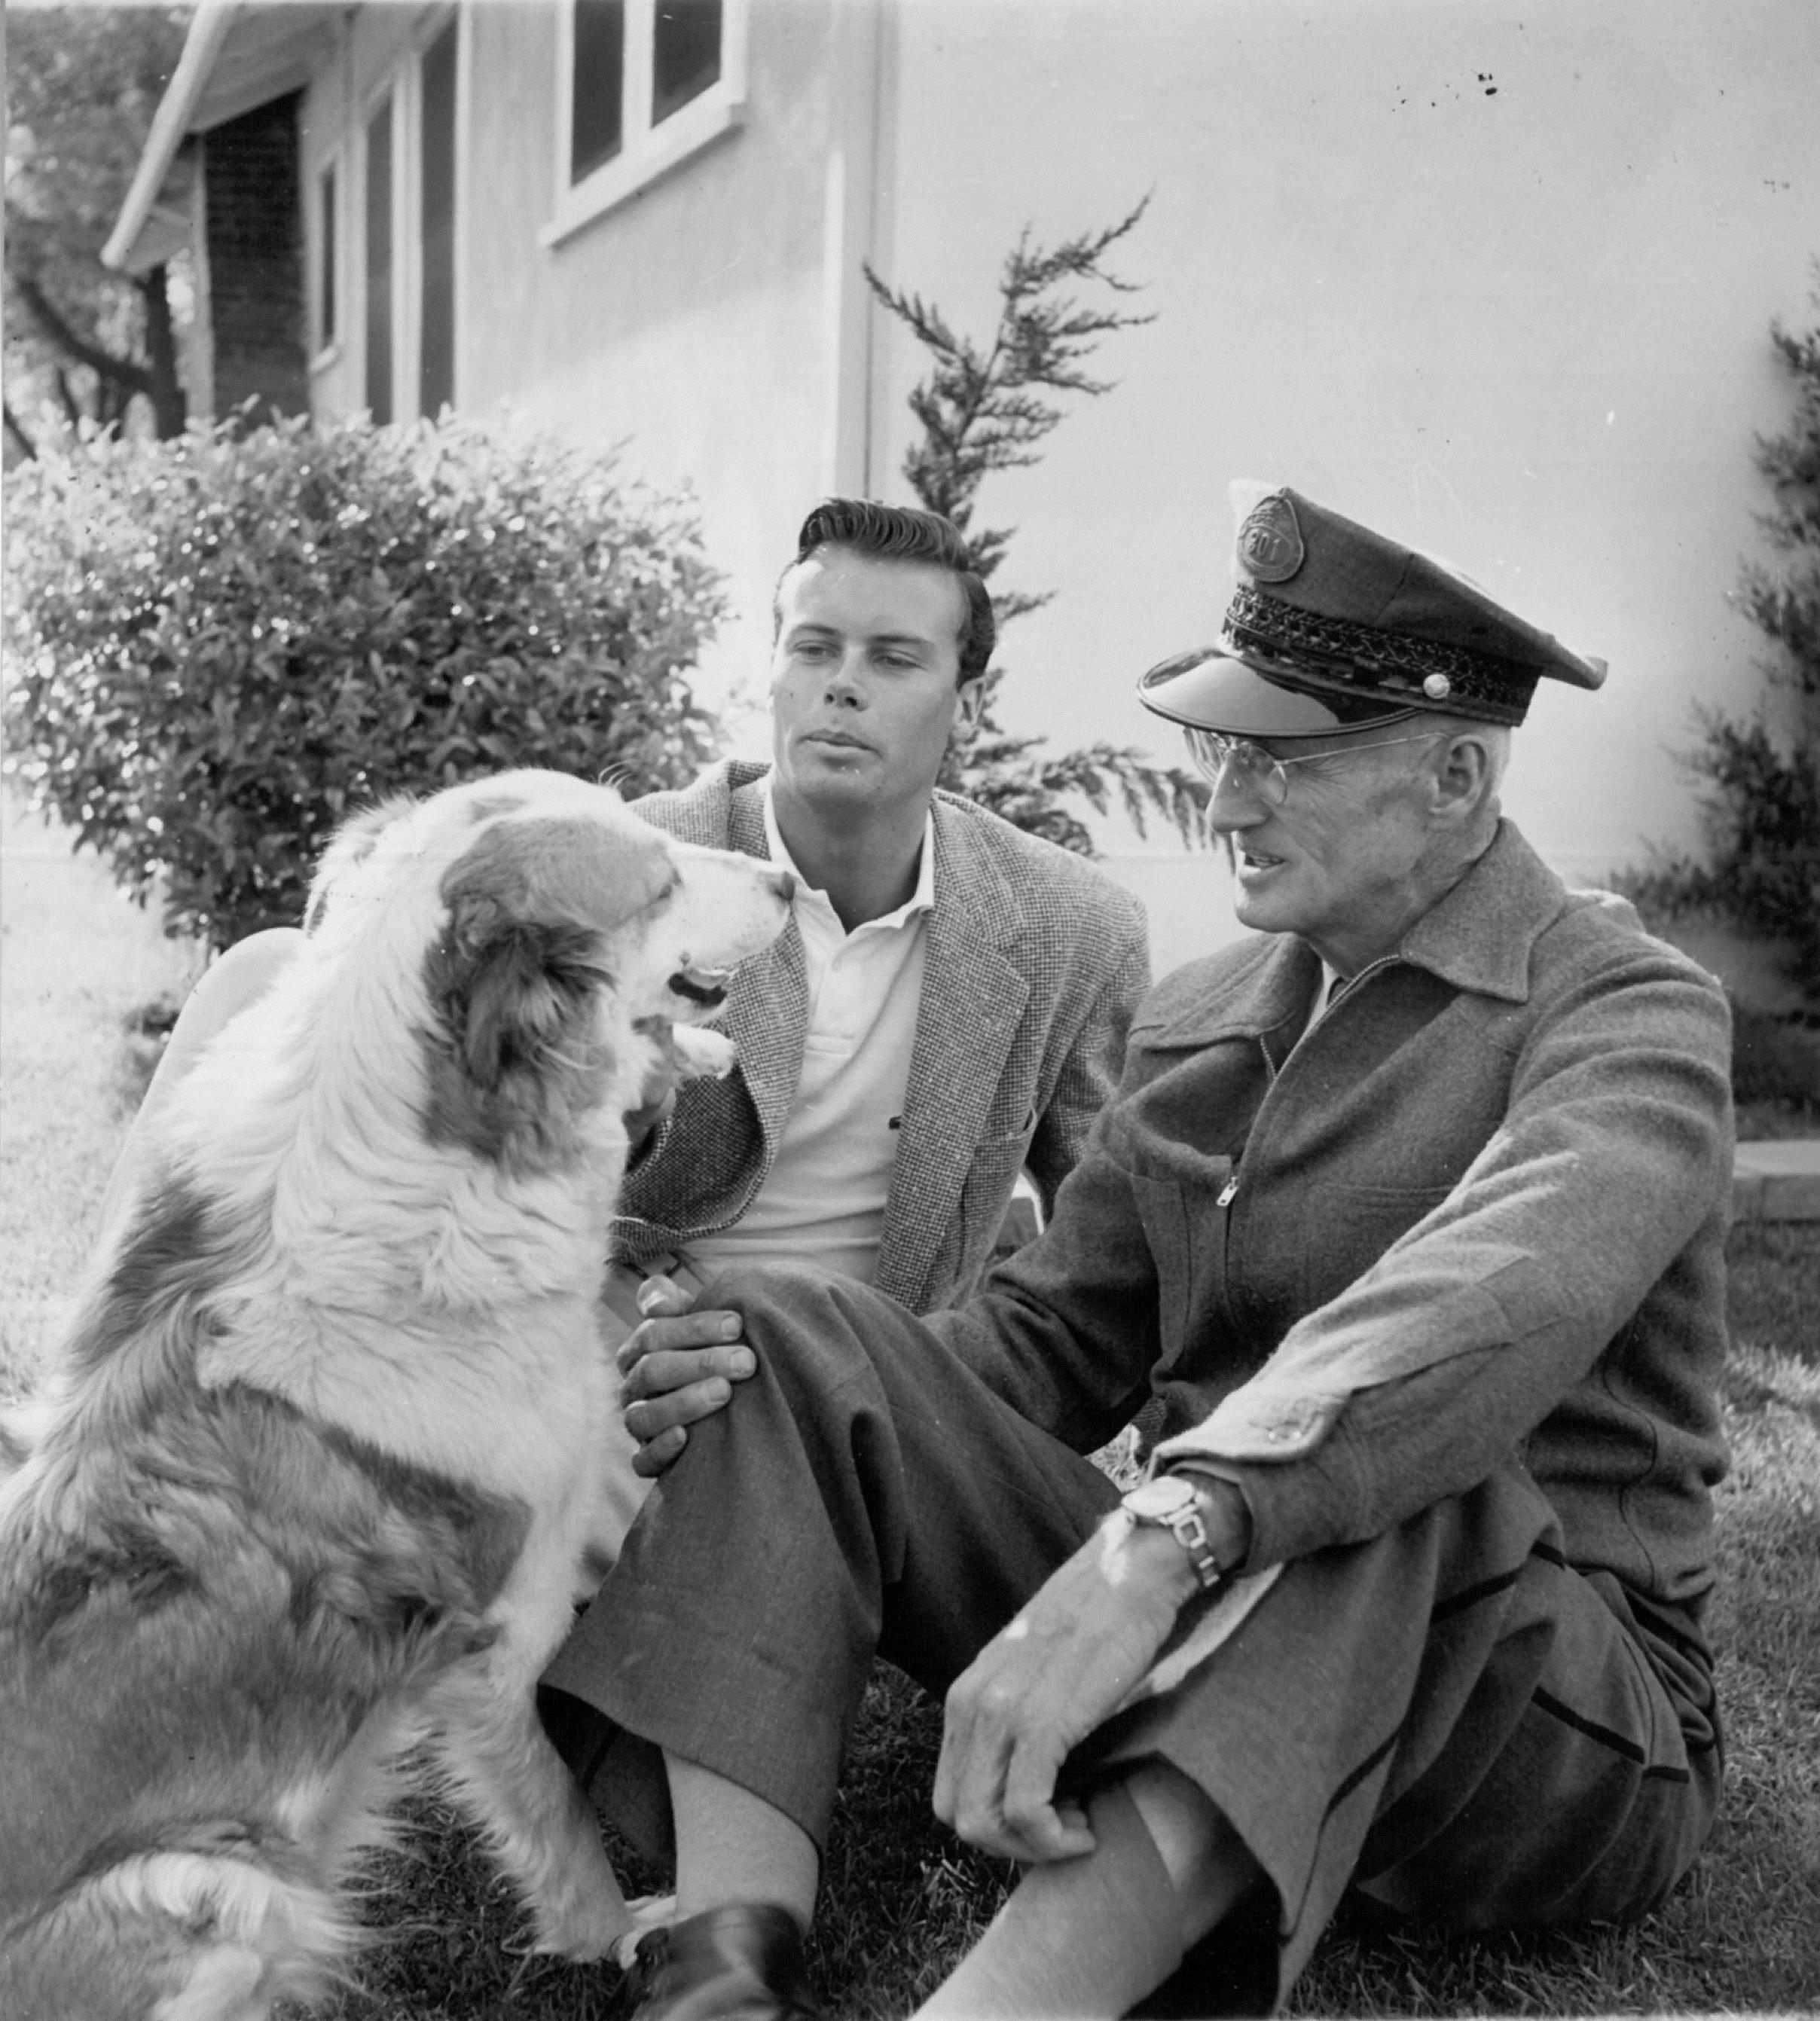  212, Bob with his father and one of the dogs named Chummy, c. Jan. 1955. Photo shows the right side of the house along Del Mar Blvd.  Don Ornitz of Globe Photos, New York City, made this photo and several others in which Bob wears these trousers and